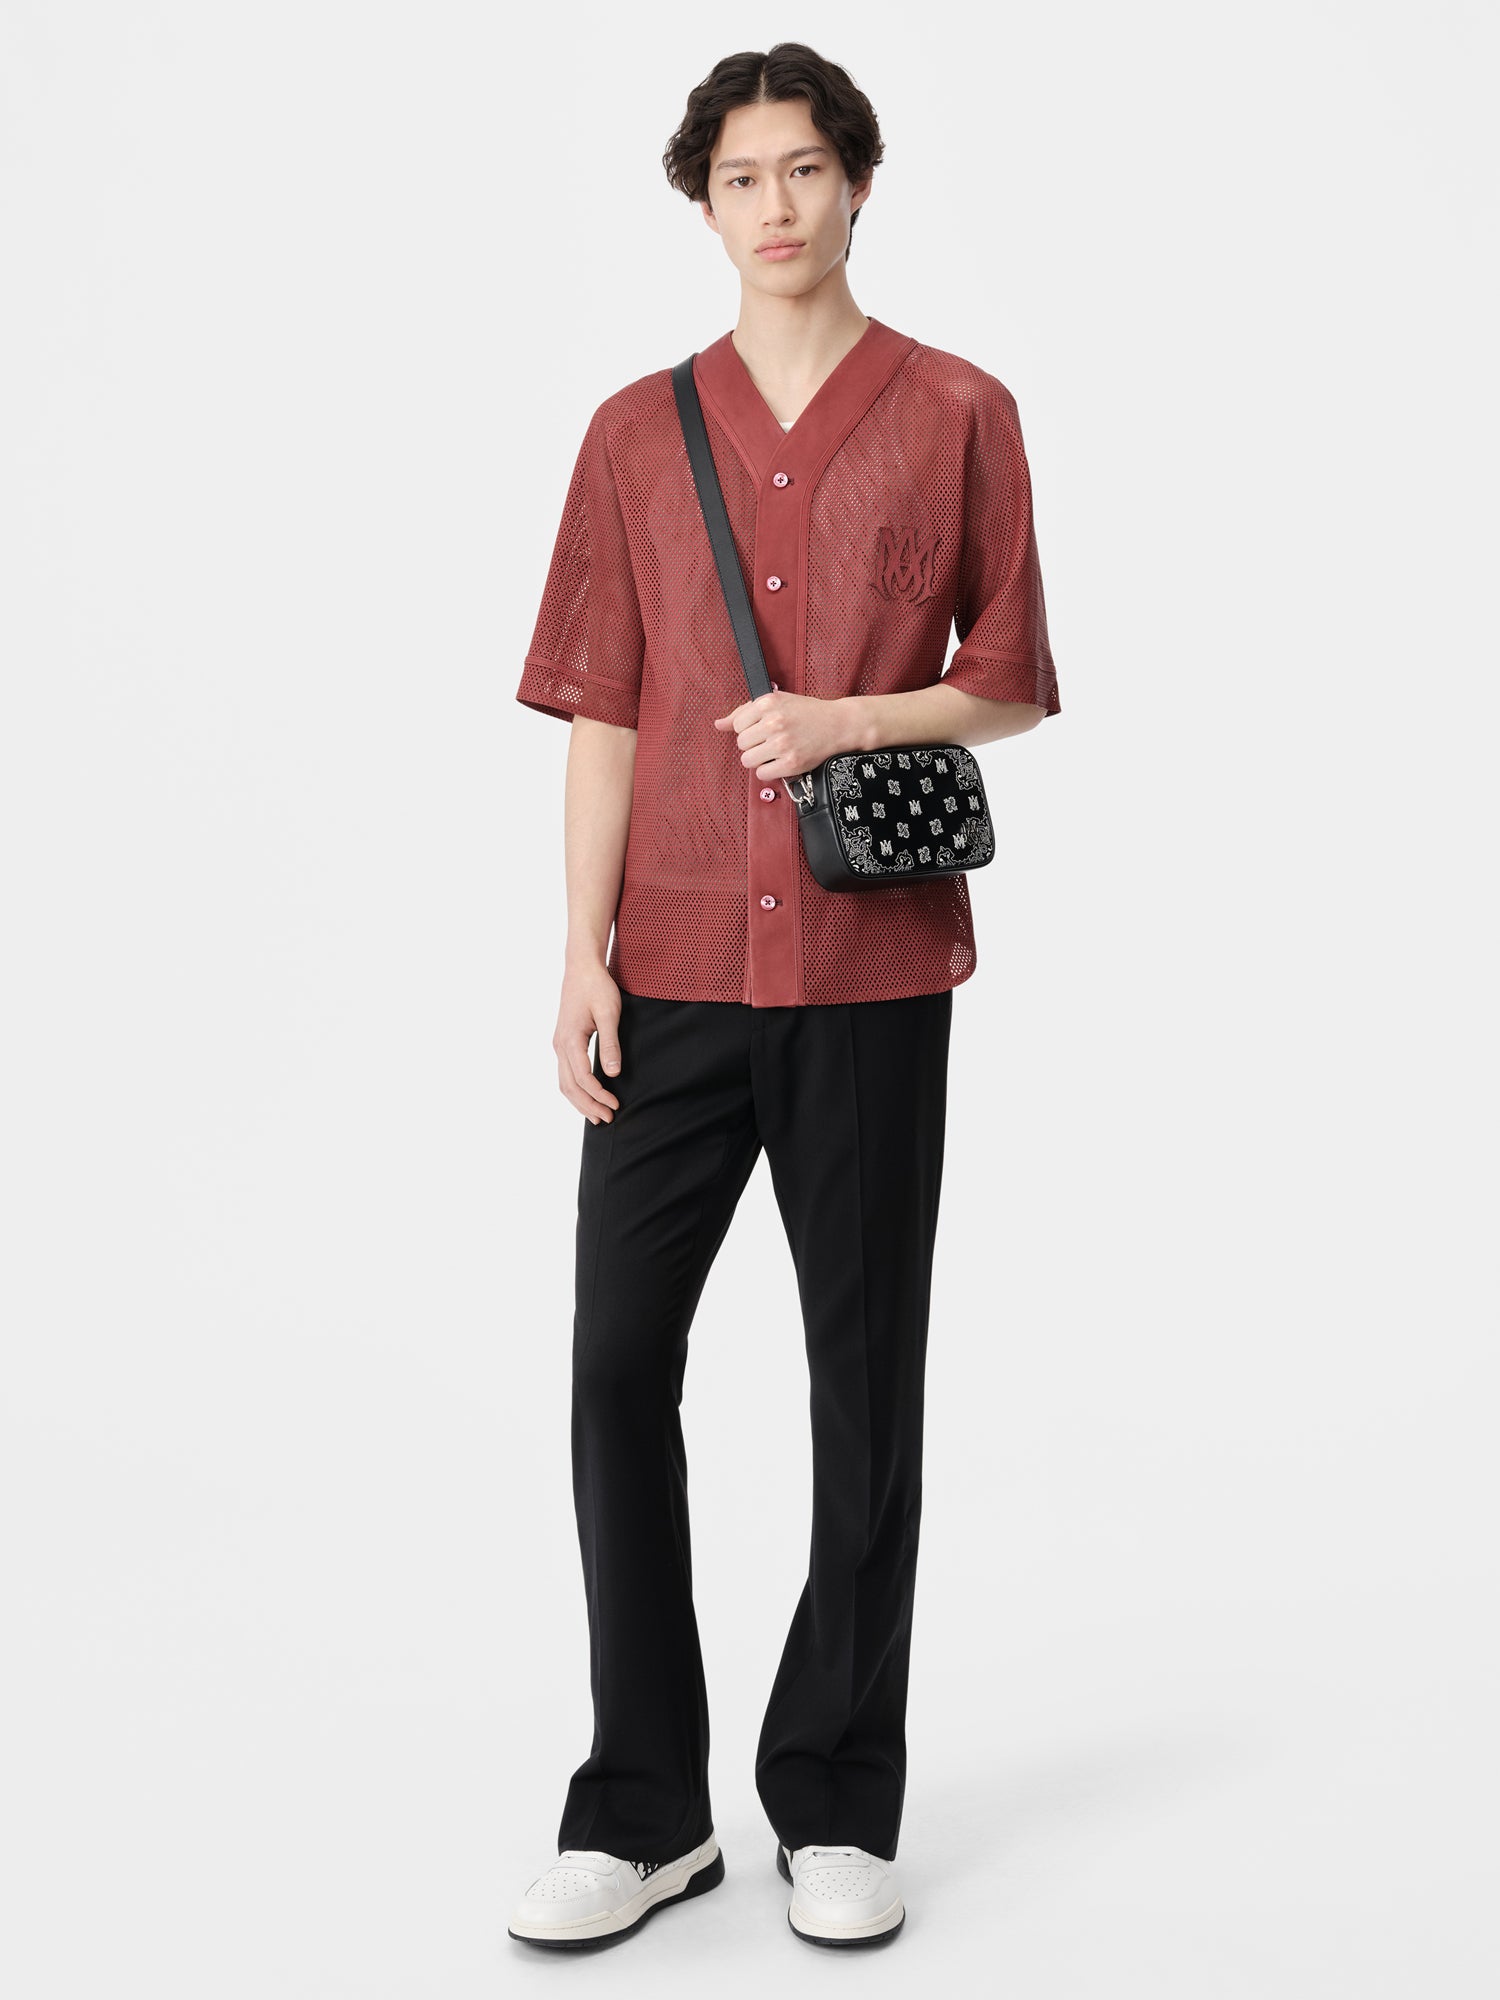 Product MA PERFORATED BASEBALL SHIRT - Sun Dried Tomato featured image